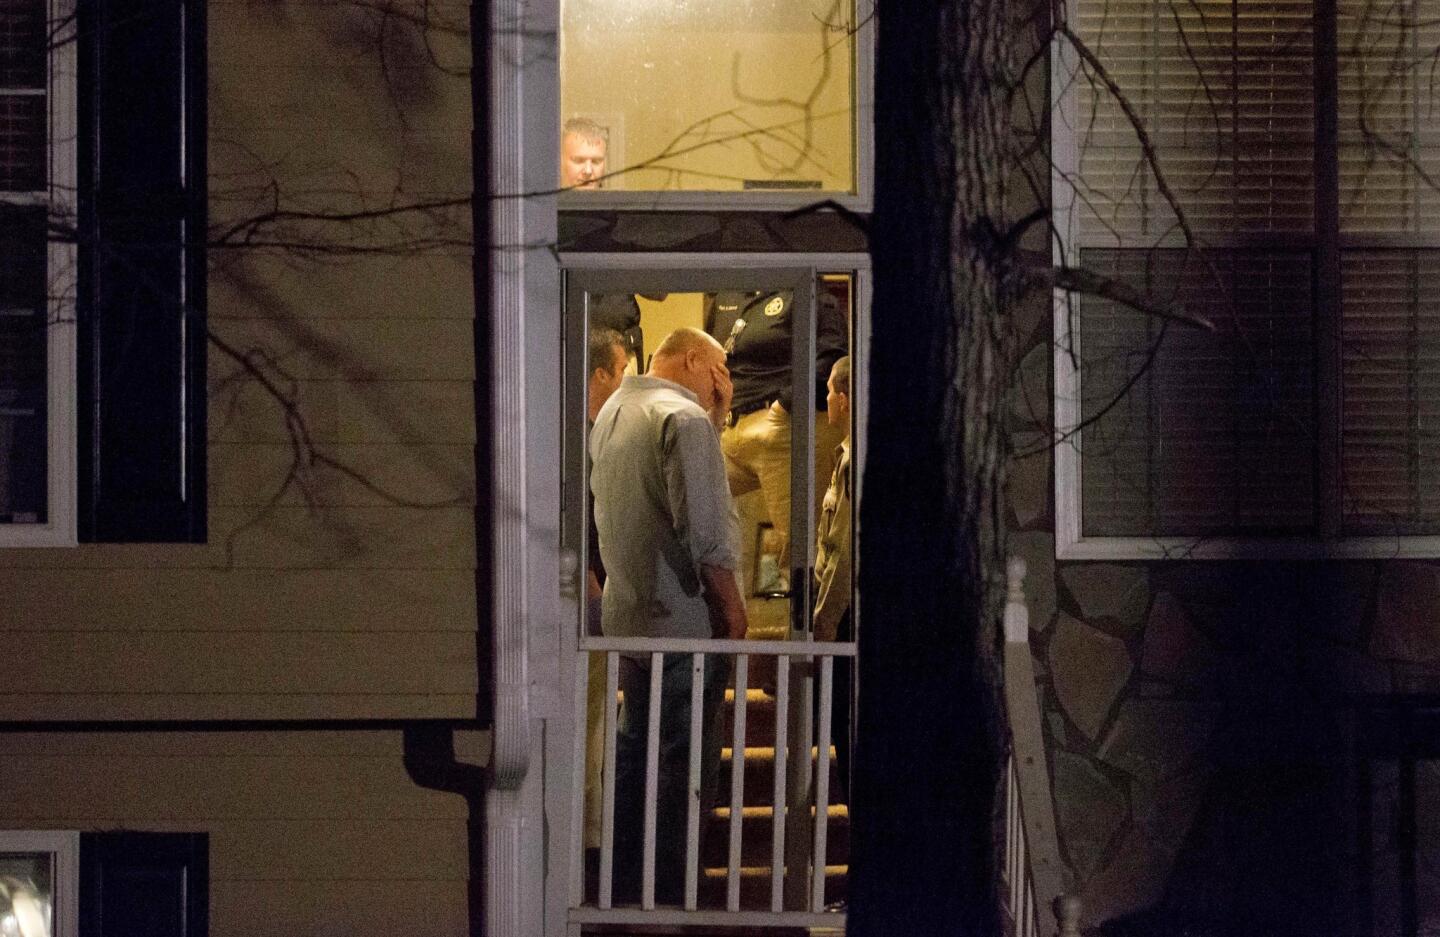 Police stand in the doorway of a home while investigating the shooting scene where authorities say five people are dead, including the gunman, in Douglasville, Ga.